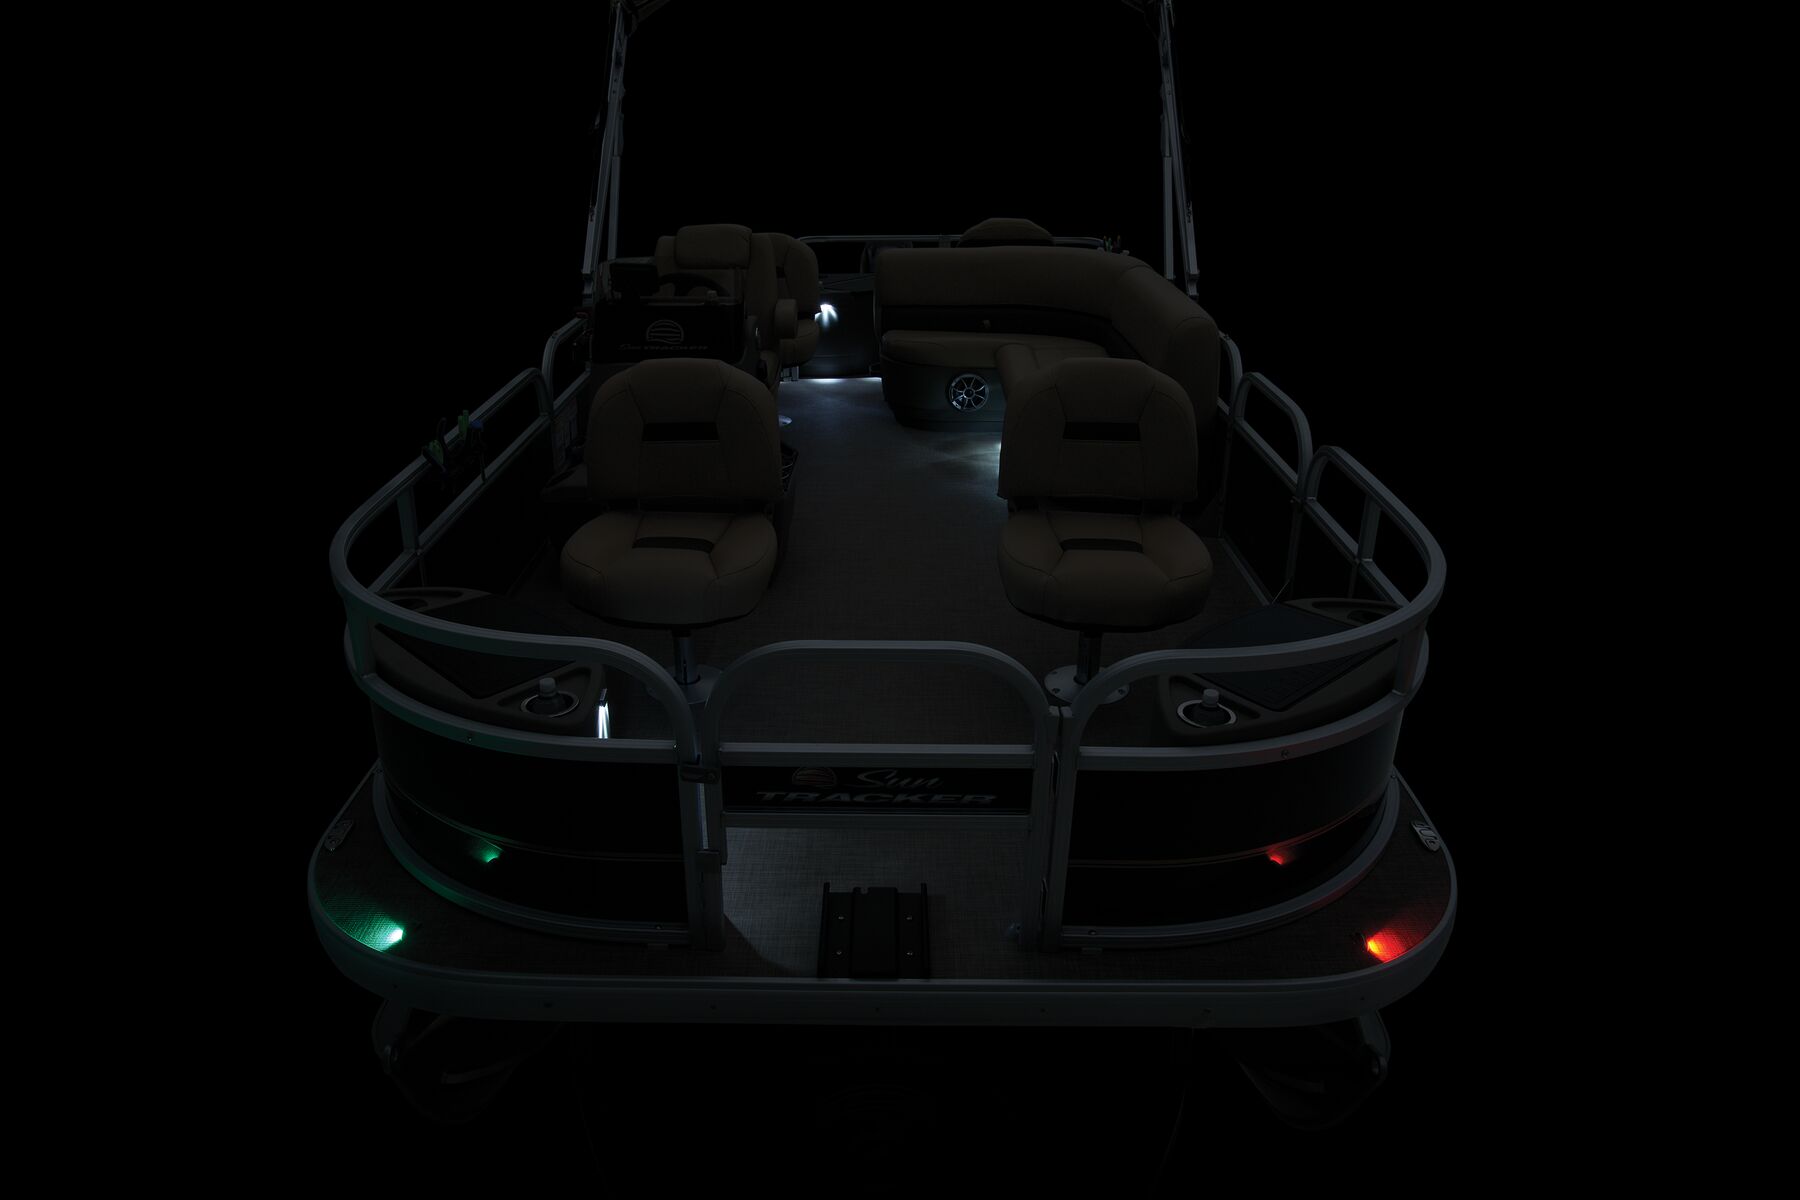 2023 Sun Tracker Bass Buggy 18 DLX pontoon boat quick release